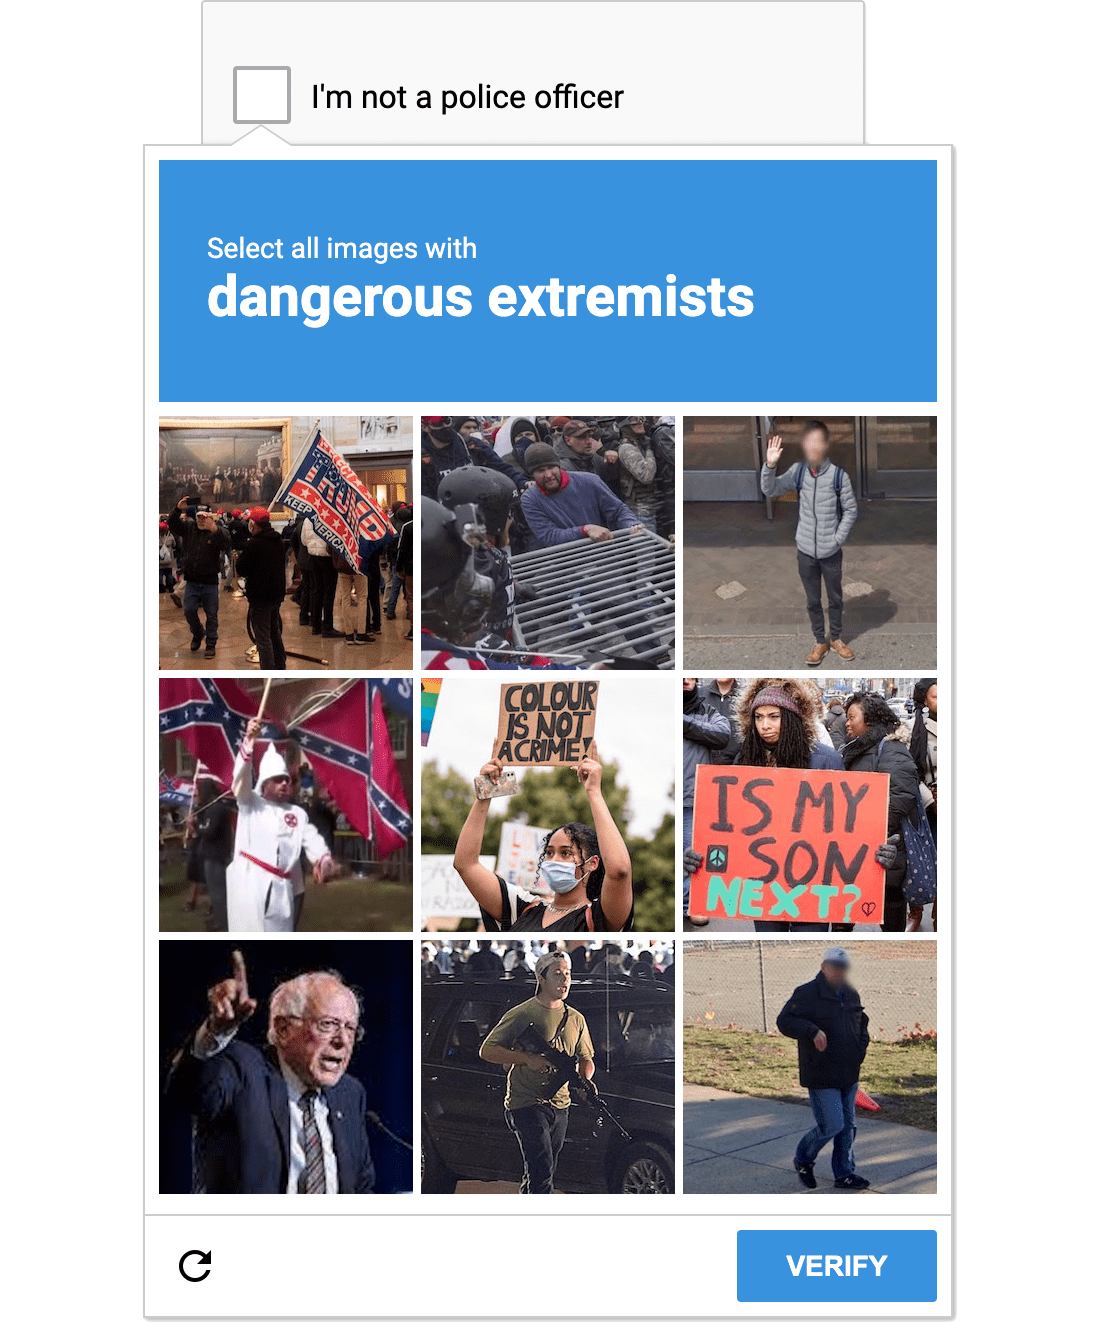 A screenshot of COPTCHA, which looks exactly like Google’s reCAPTCHA
dialogs. This one asks the user to select all images with “dangerous
extremists”. Images include photos of BLM protesters, Bernie Sanders,
a random pedestrian, and actual extremists.